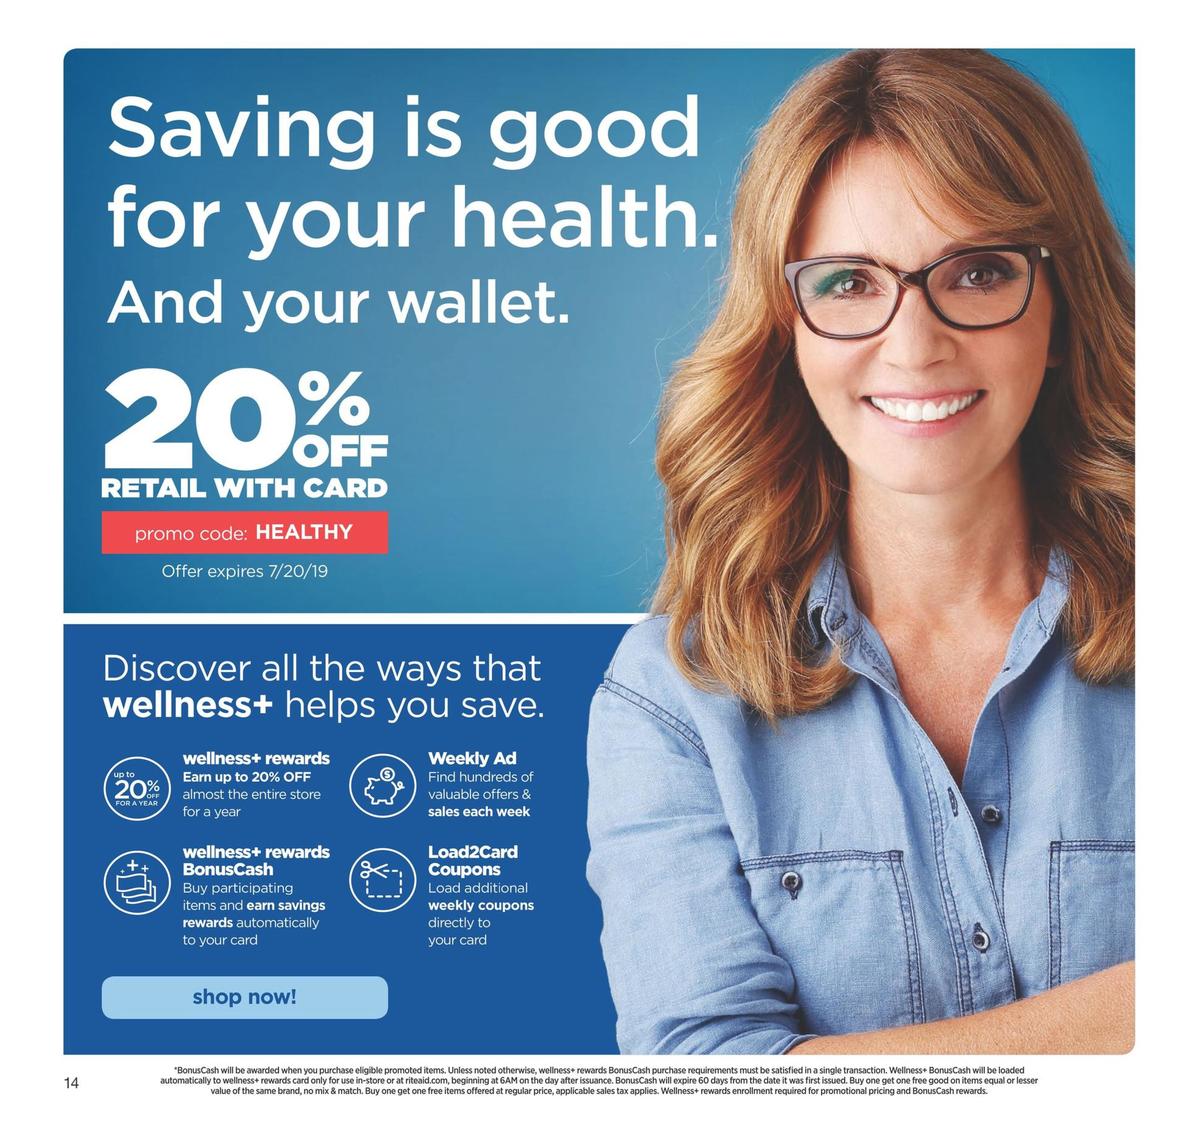 Rite Aid Weekly Ad from July 14